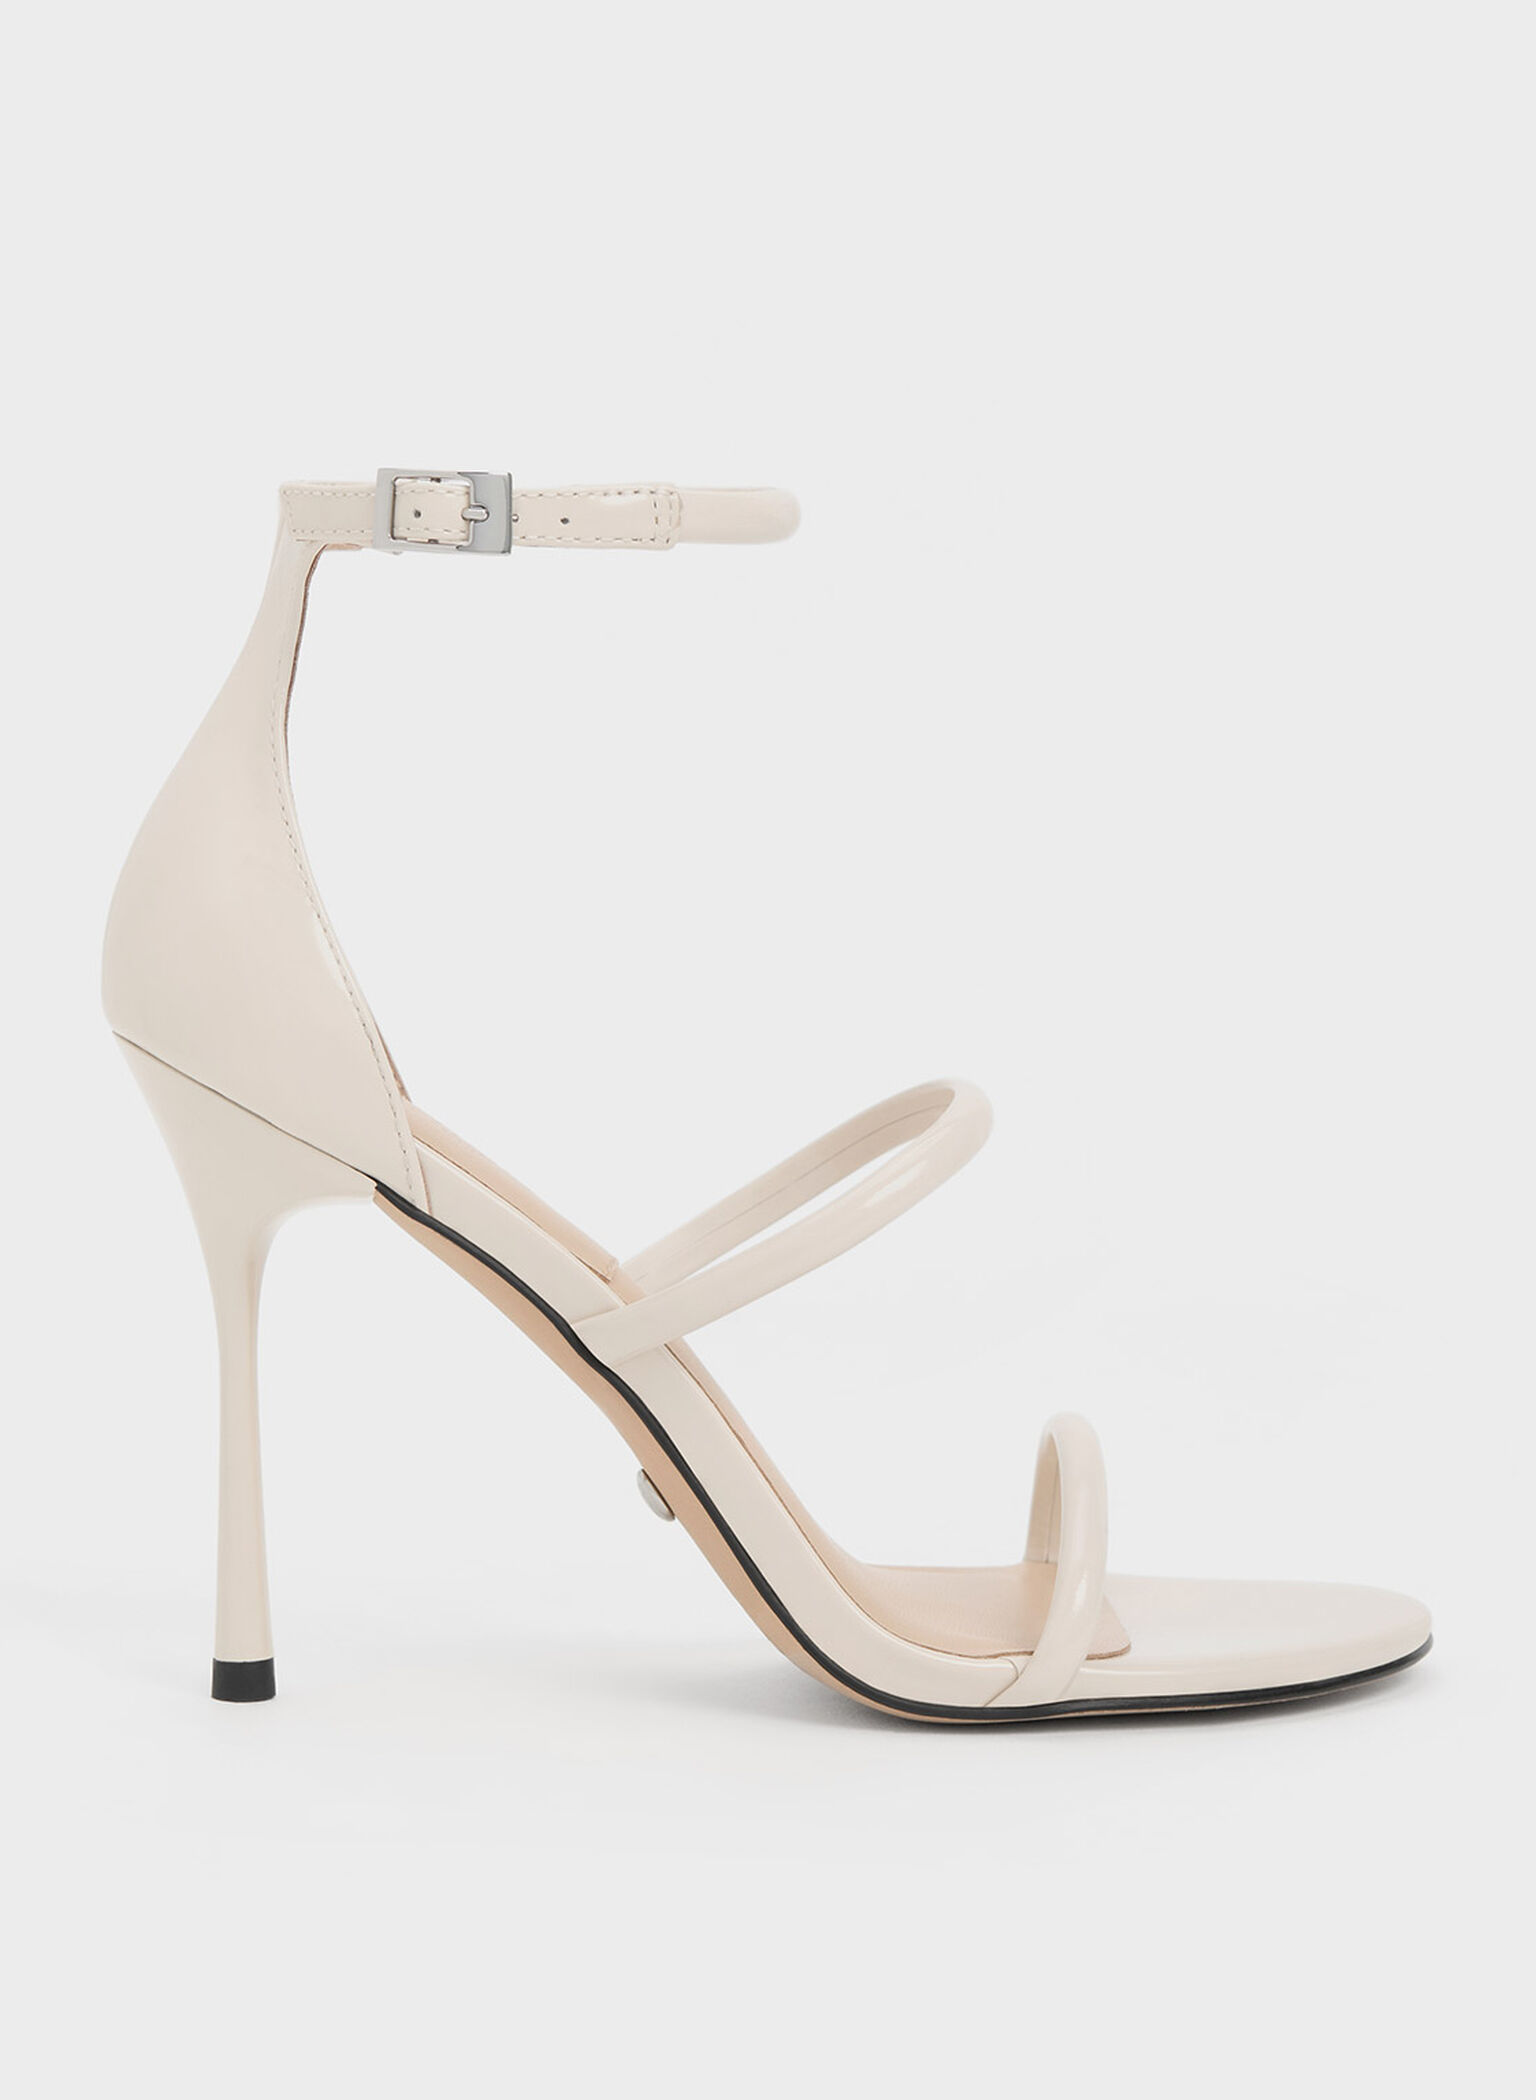 Chalk Patent Leather Triple Strap Heeled Sandals - CHARLES & KEITH SG